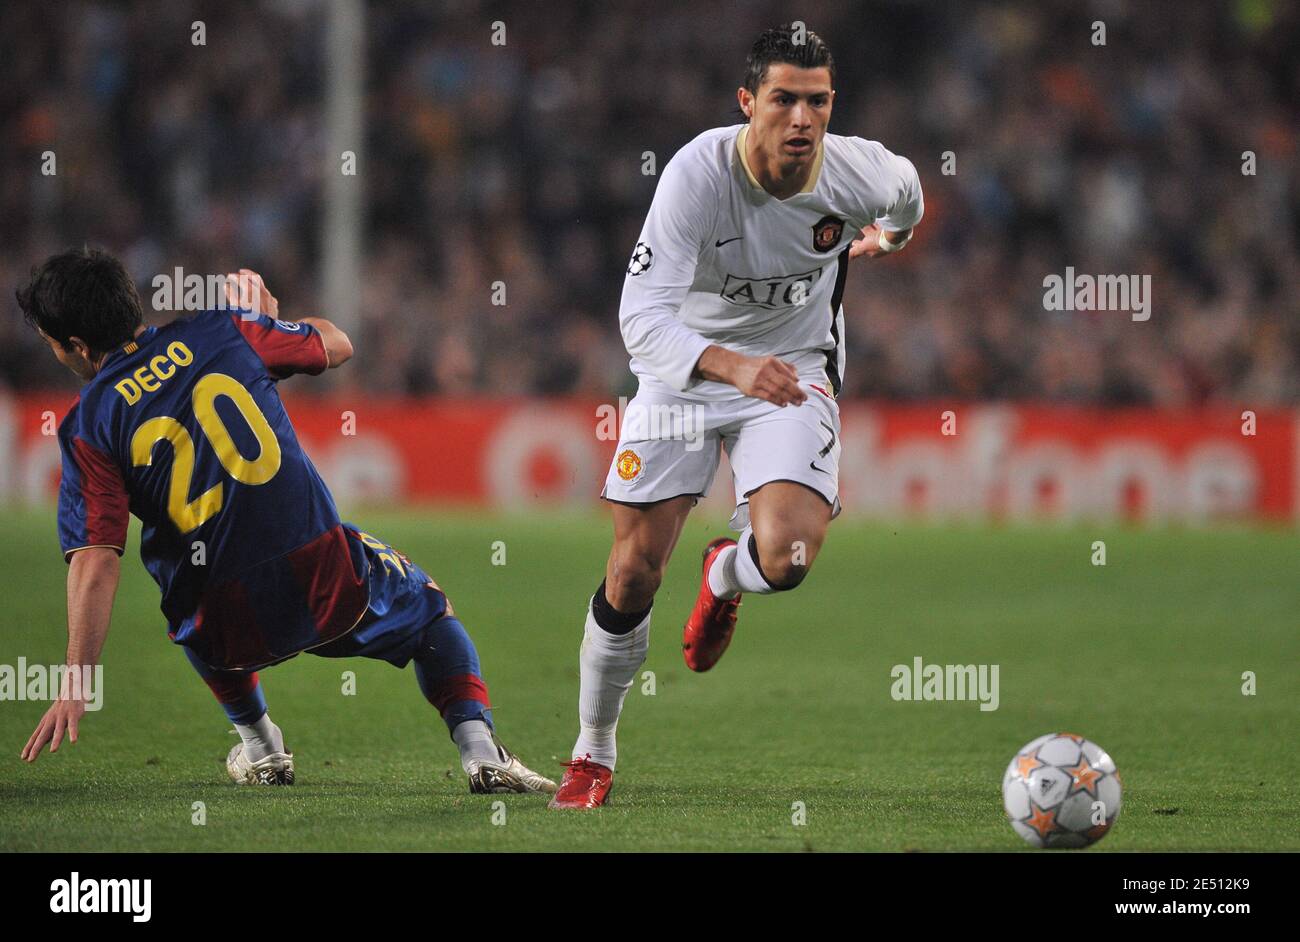 Manchester United'S Cristiano Ronaldo During The Uefa Champions League  Semi-Finals, First Leg, Soccer Match, Fc Barcelona Vs Manchester United At  The Nou Camp Stadium In Barcelona, Spain On April 23, 2008. The